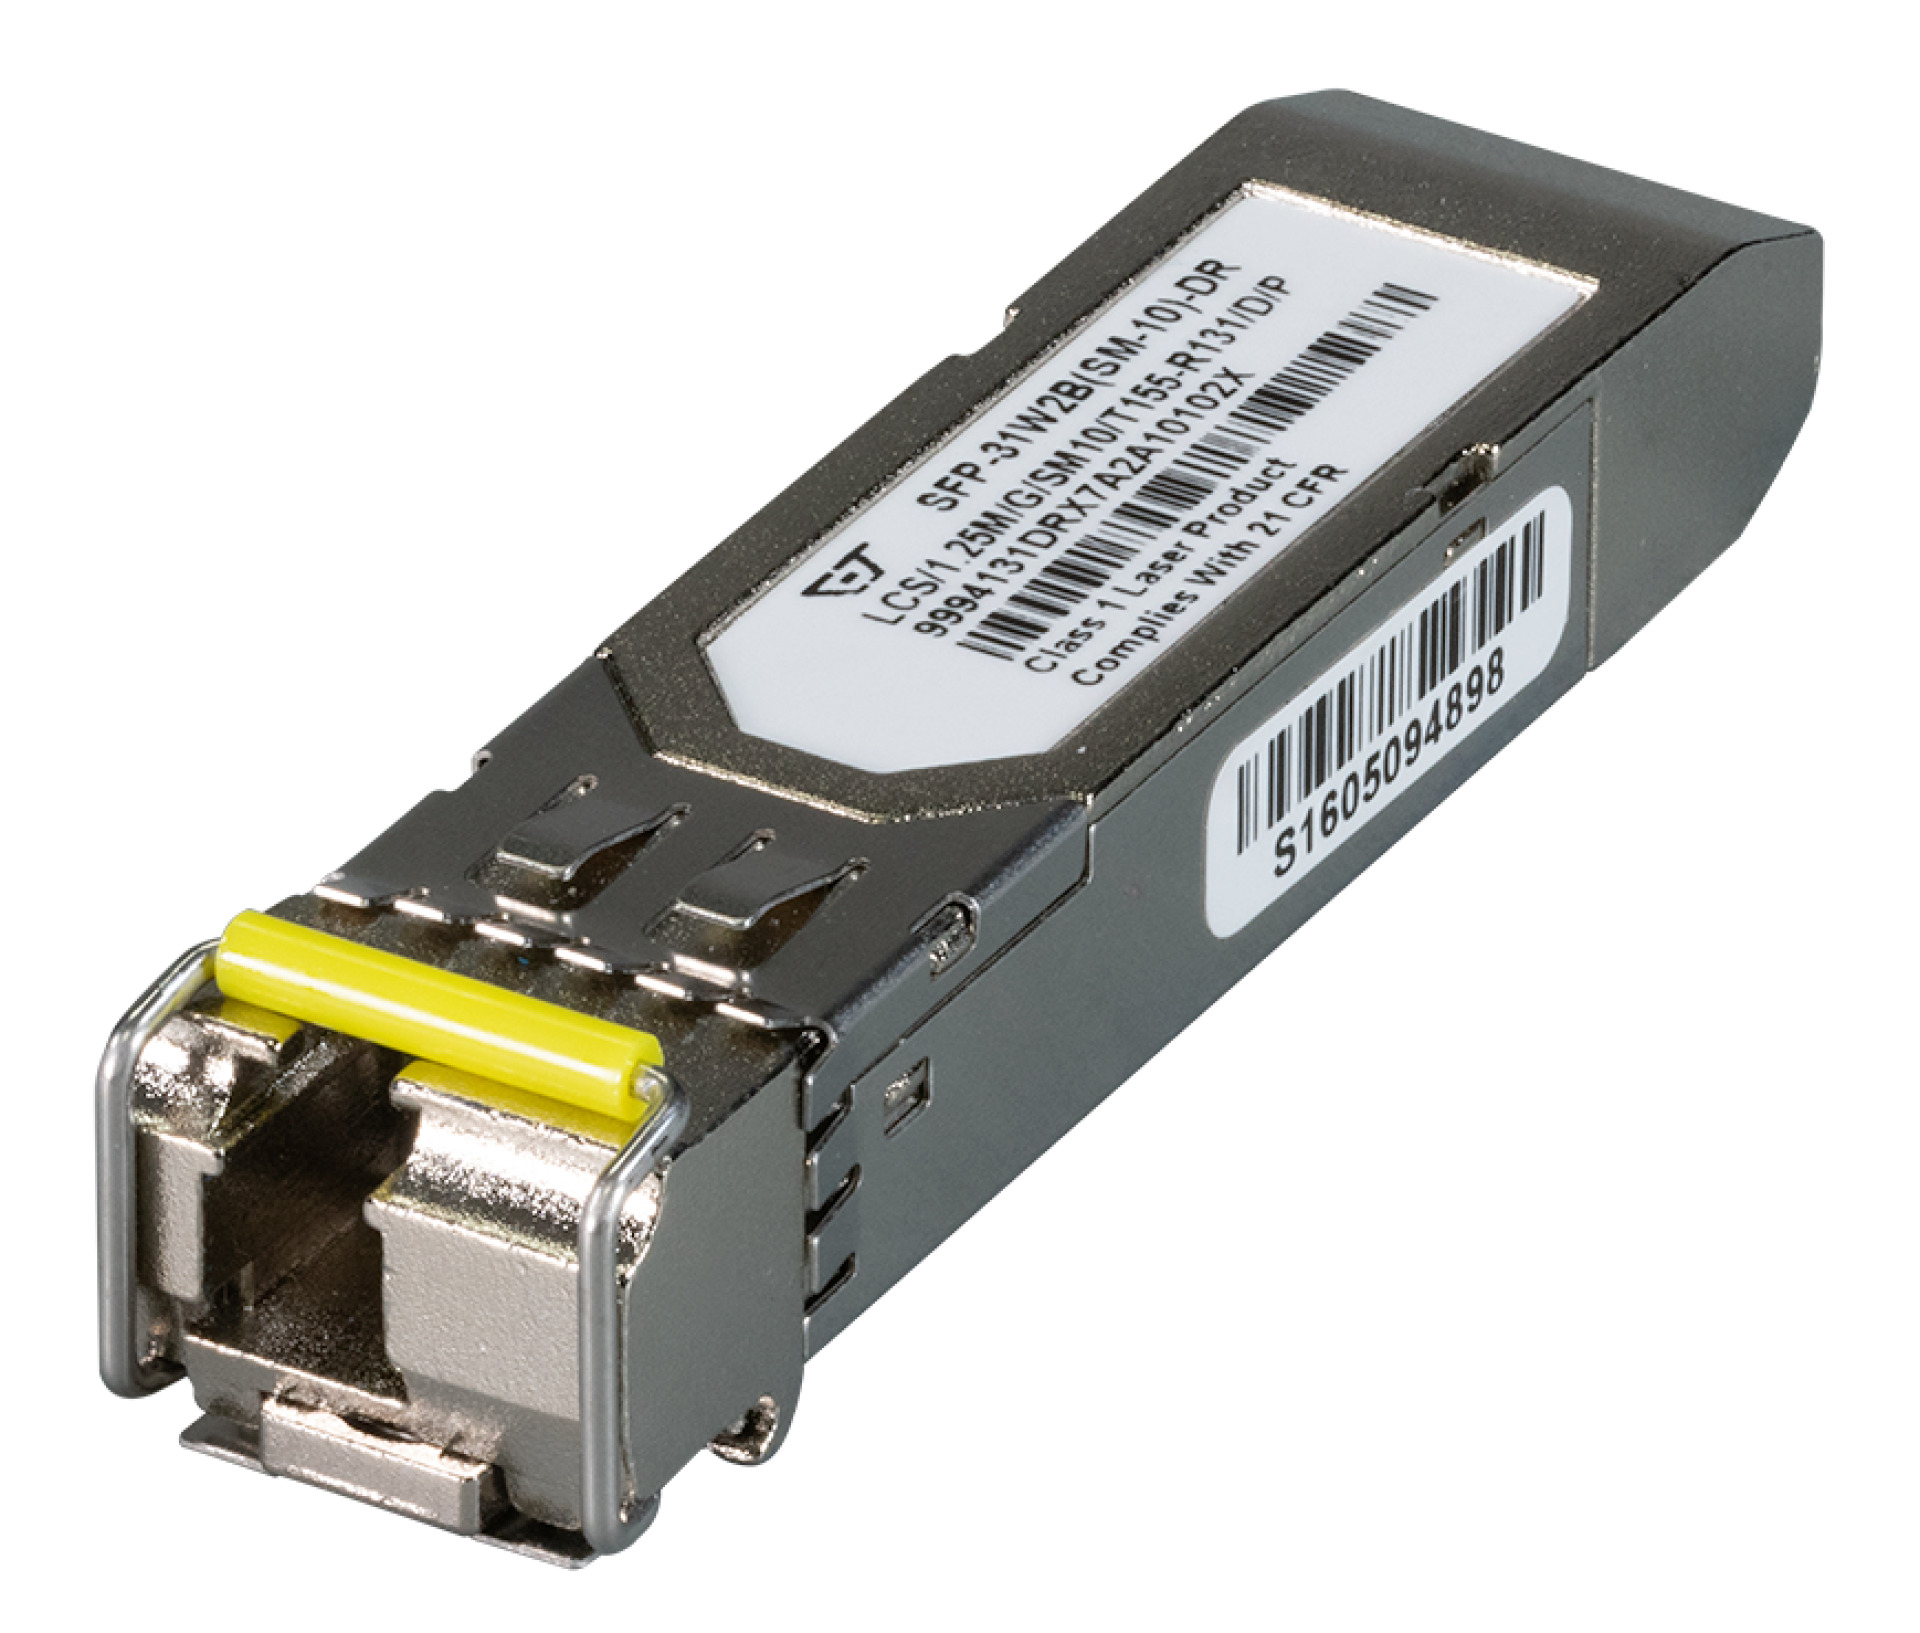 SFP 100/1000Mbps Dual Rate,WDM, LC, 10km, TX1550/RX1310nm, 0° to 70°C